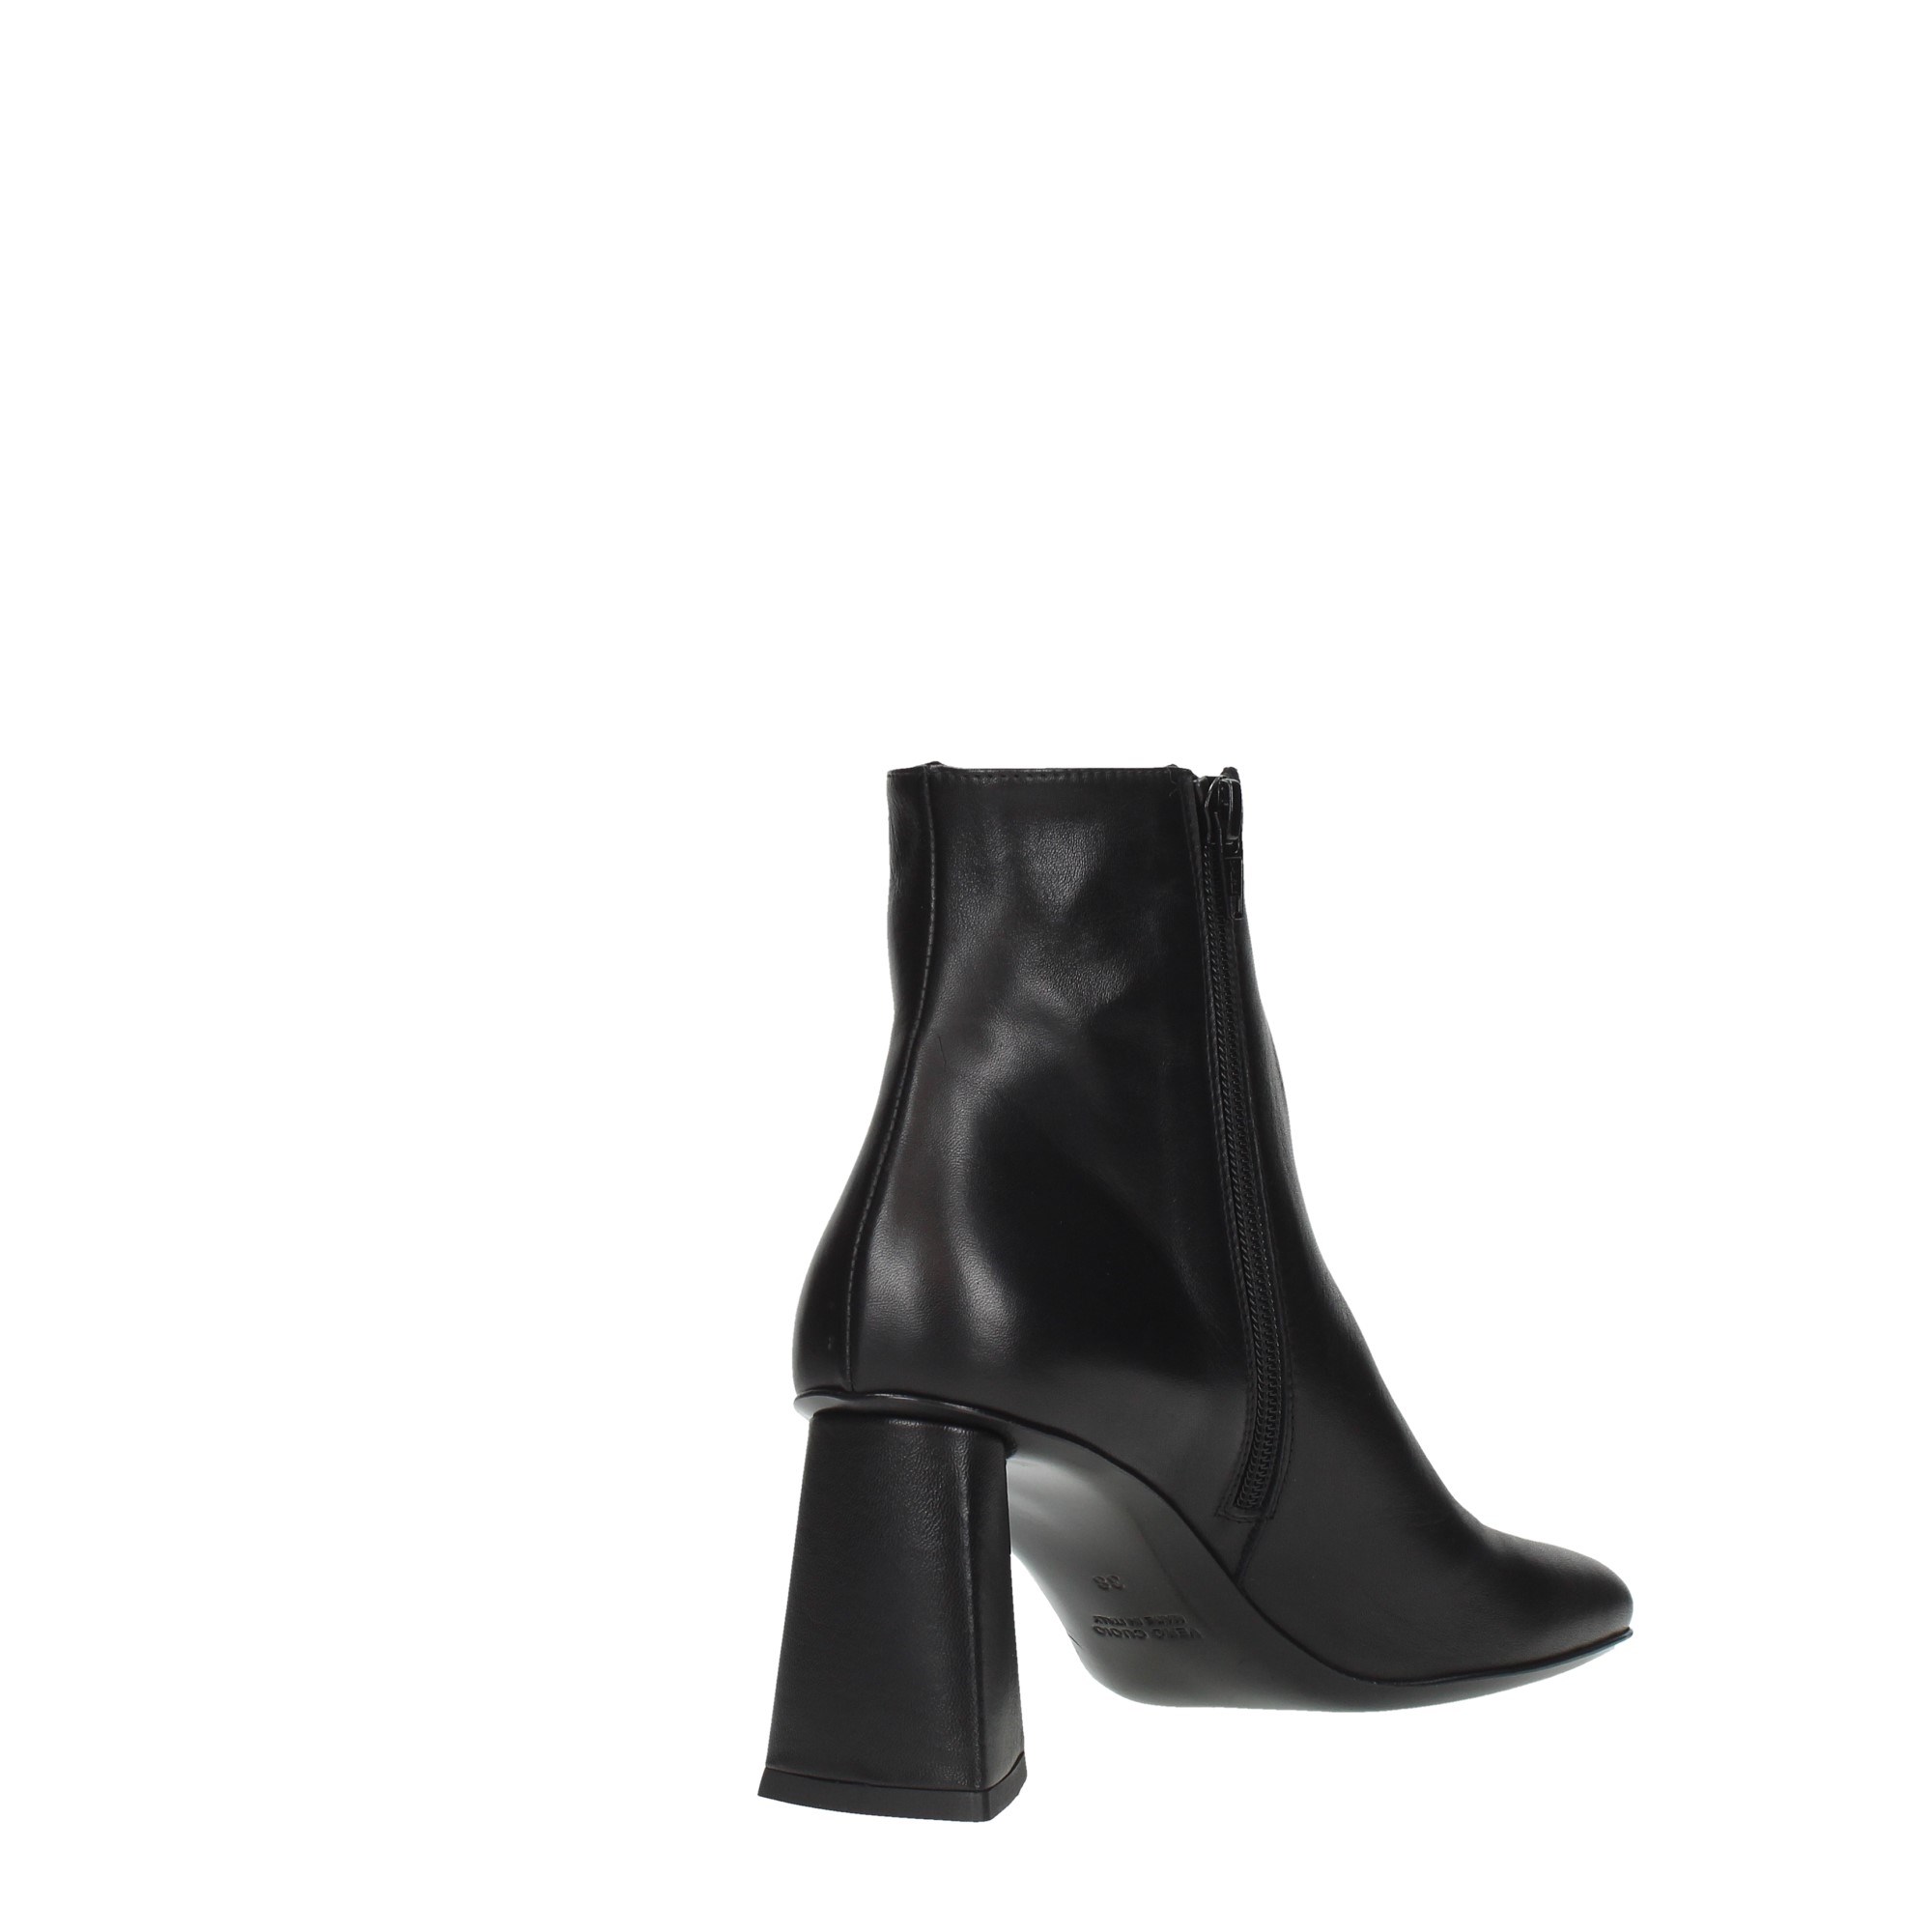 Strategia Shoes Women Booties A5263